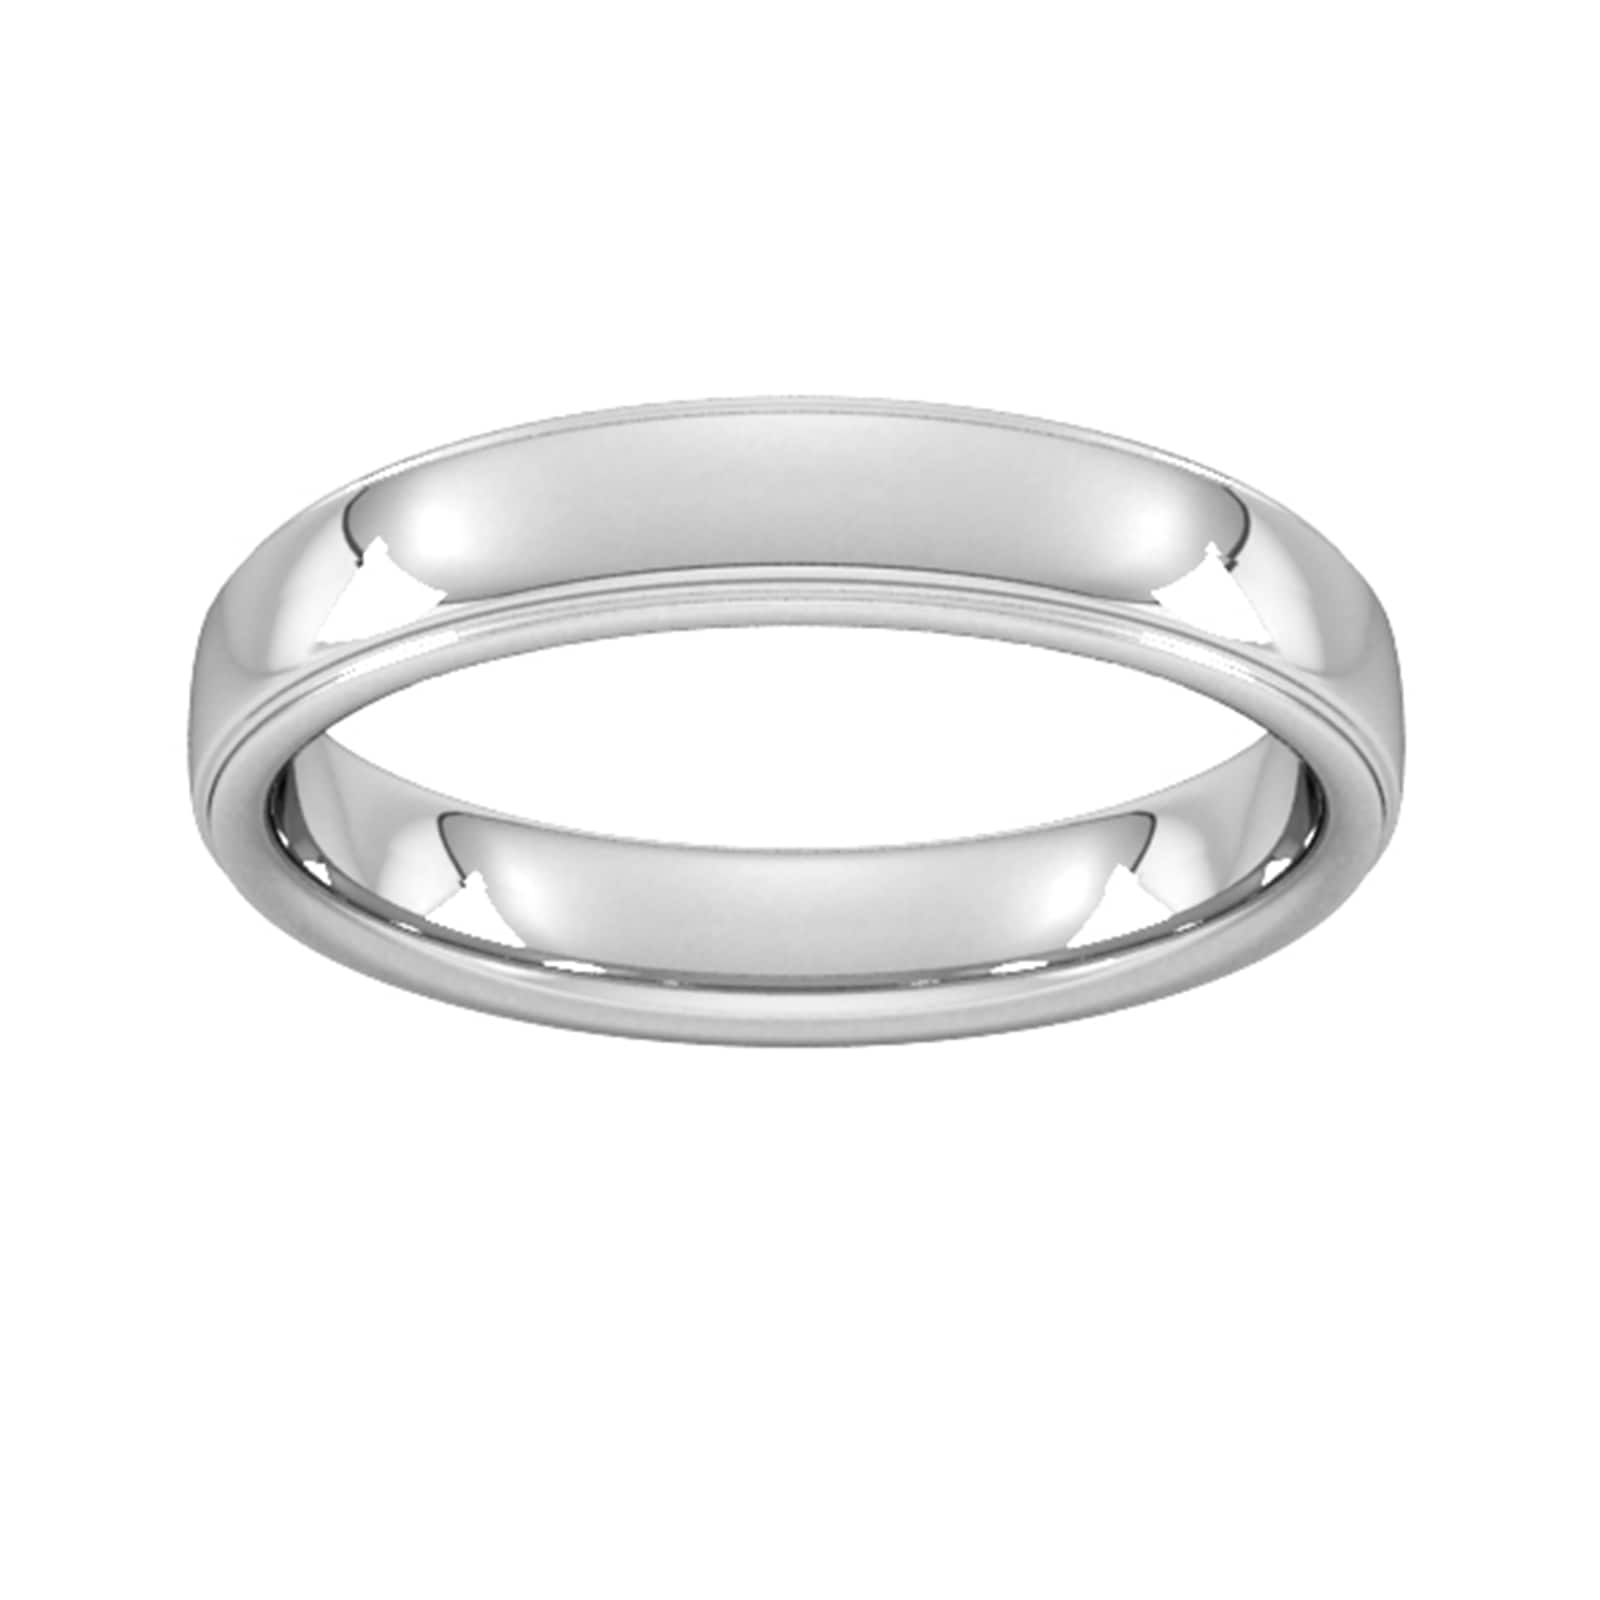 4mm Slight Court Standard Polished Finish With Grooves Wedding Ring In 950 Palladium - Ring Size L